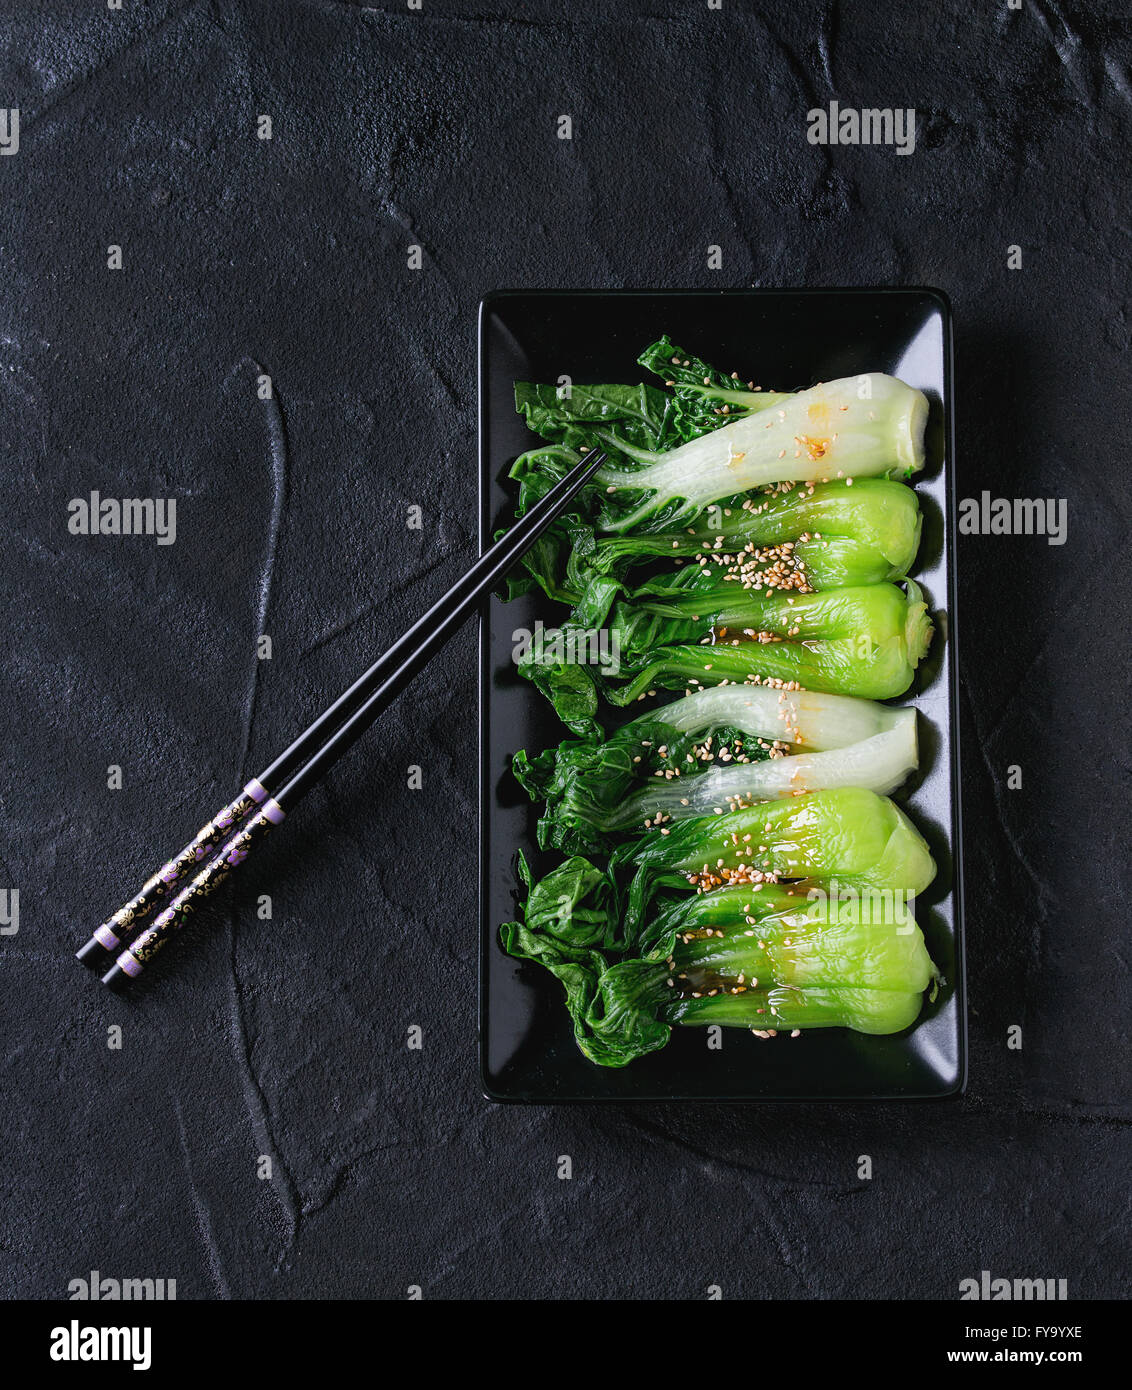 Cooked bok choy with sesame seeds Stock Photo